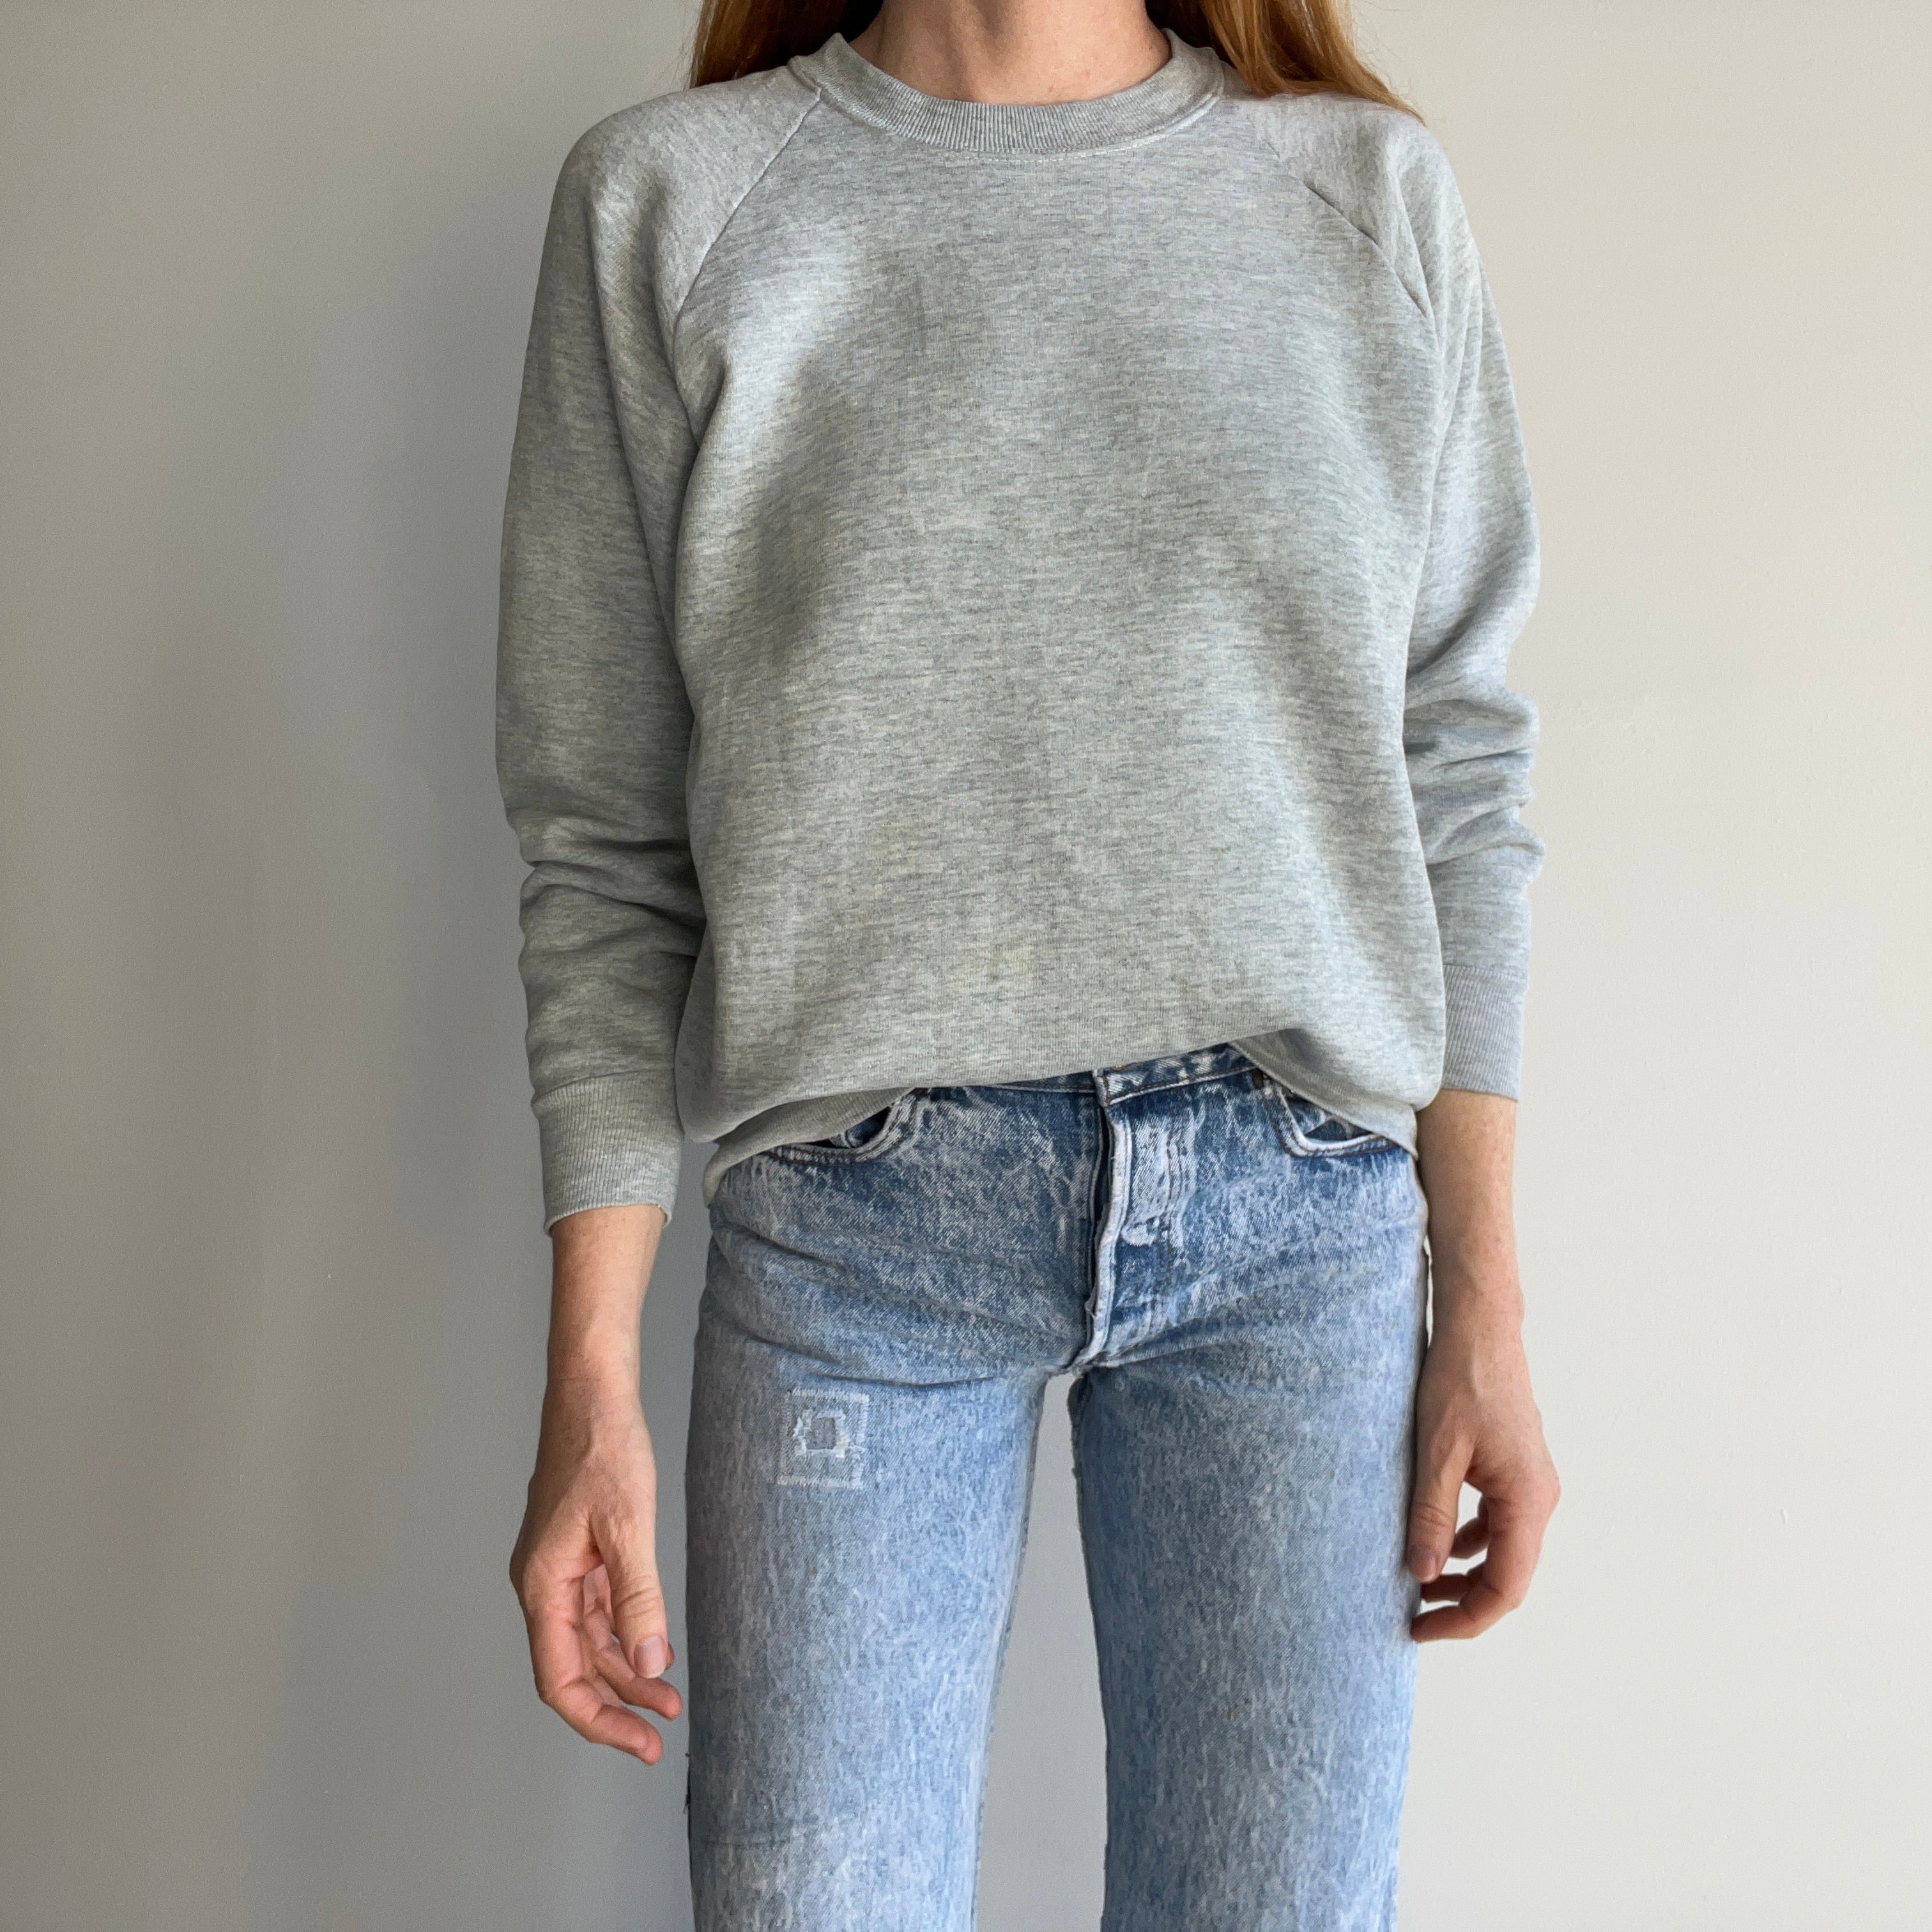 1980s Nicely Stained and Tattered FOTL Blank Gray Sweatshirt